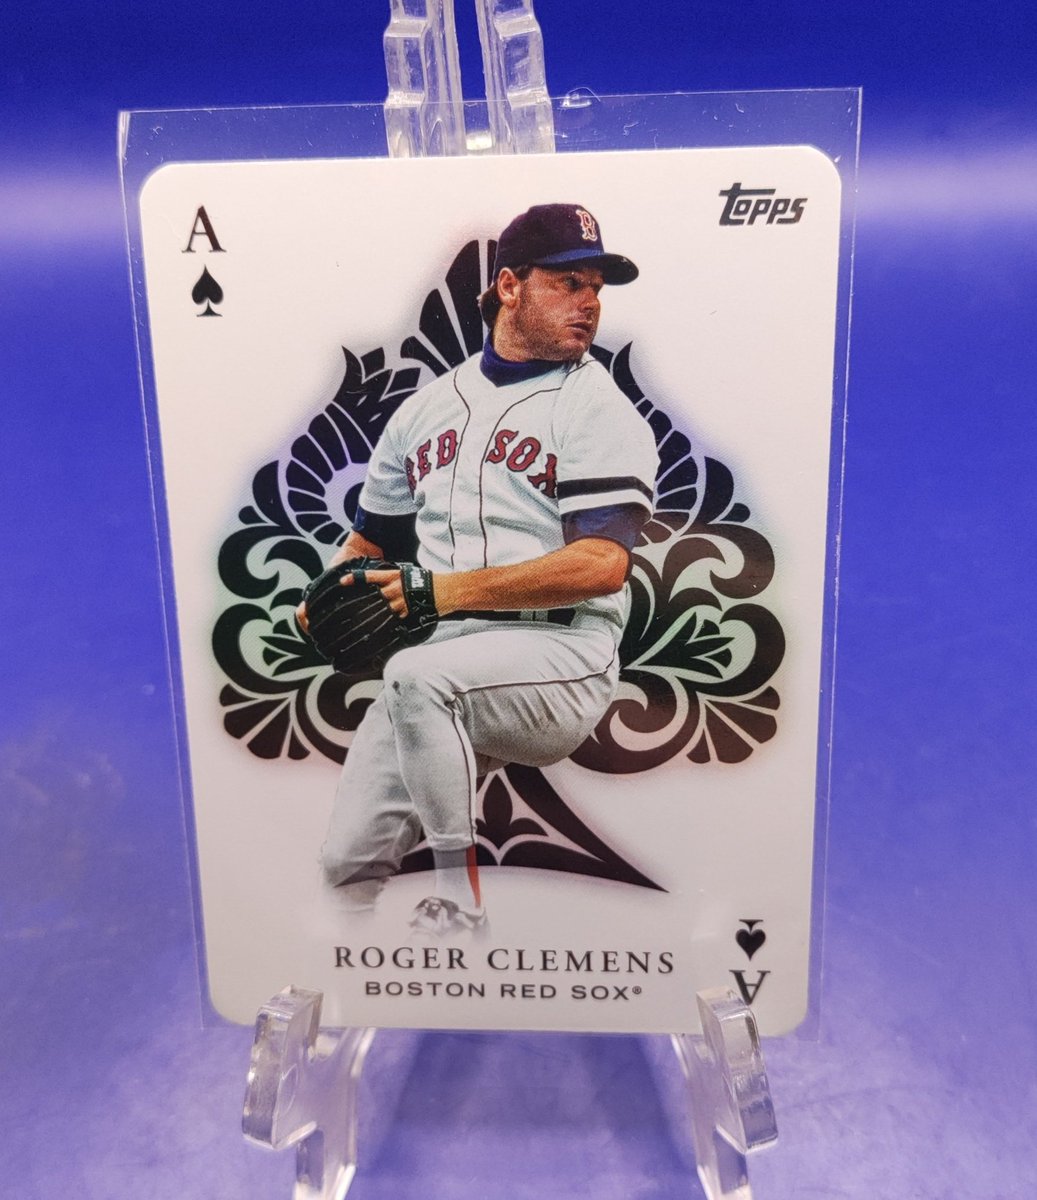 Roger Clemens 
Aces

#WackyWednesday 
Starting bid $1.00
At least a $.25 is required after opening 

#WackyWeekFinalRound is tomorrow 
Add to your #WackyStack
Happy collecting everyone